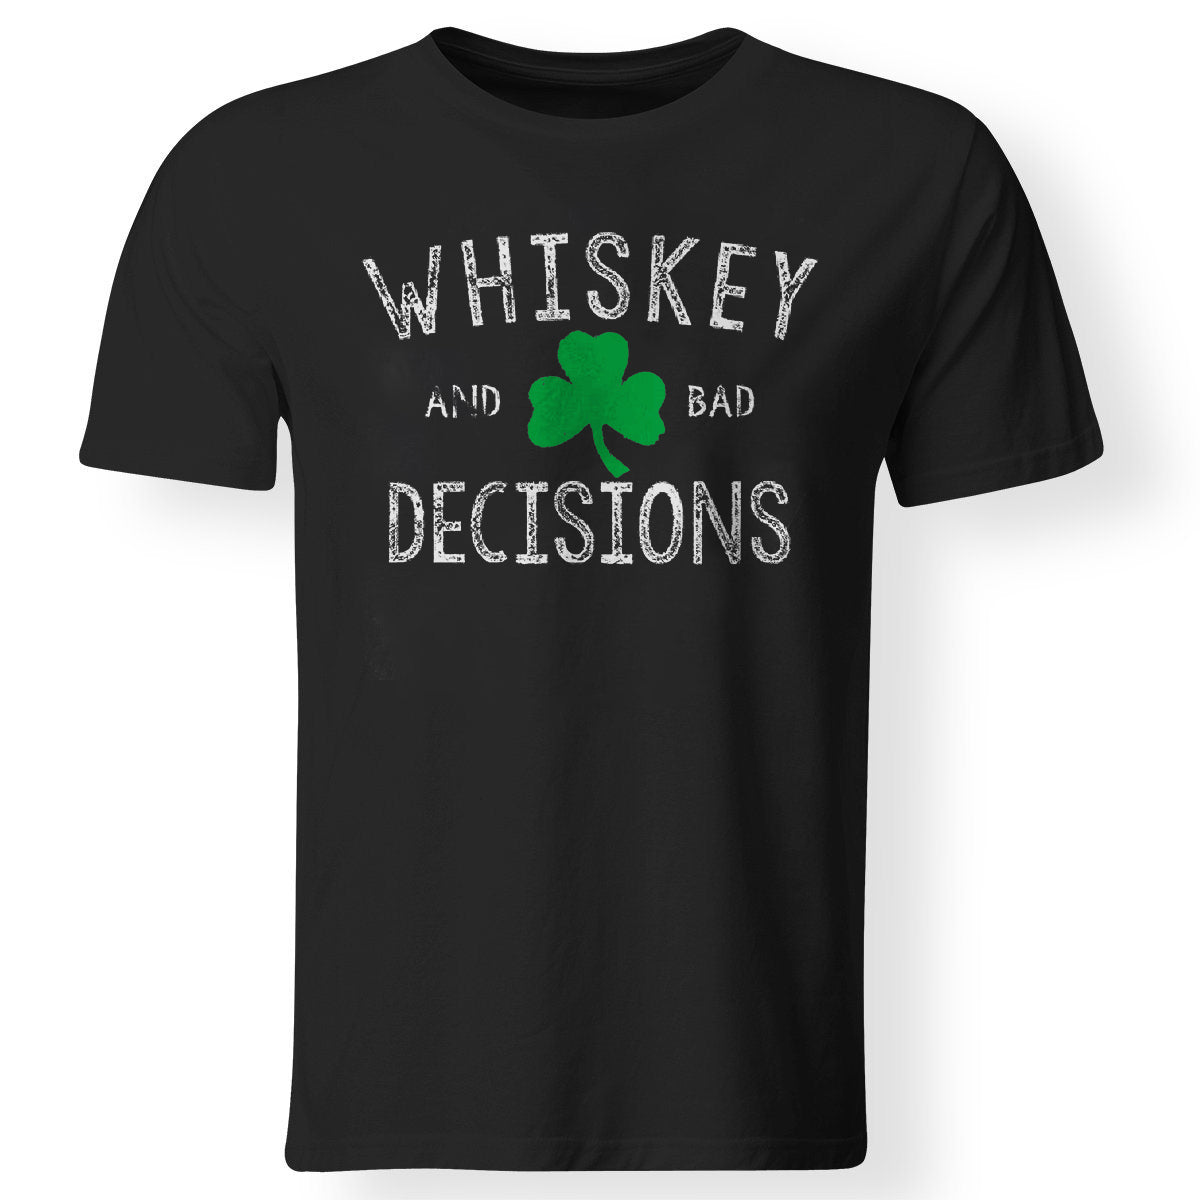 Whiskey And Bad Decisions St. Patrick's Day T-shirt